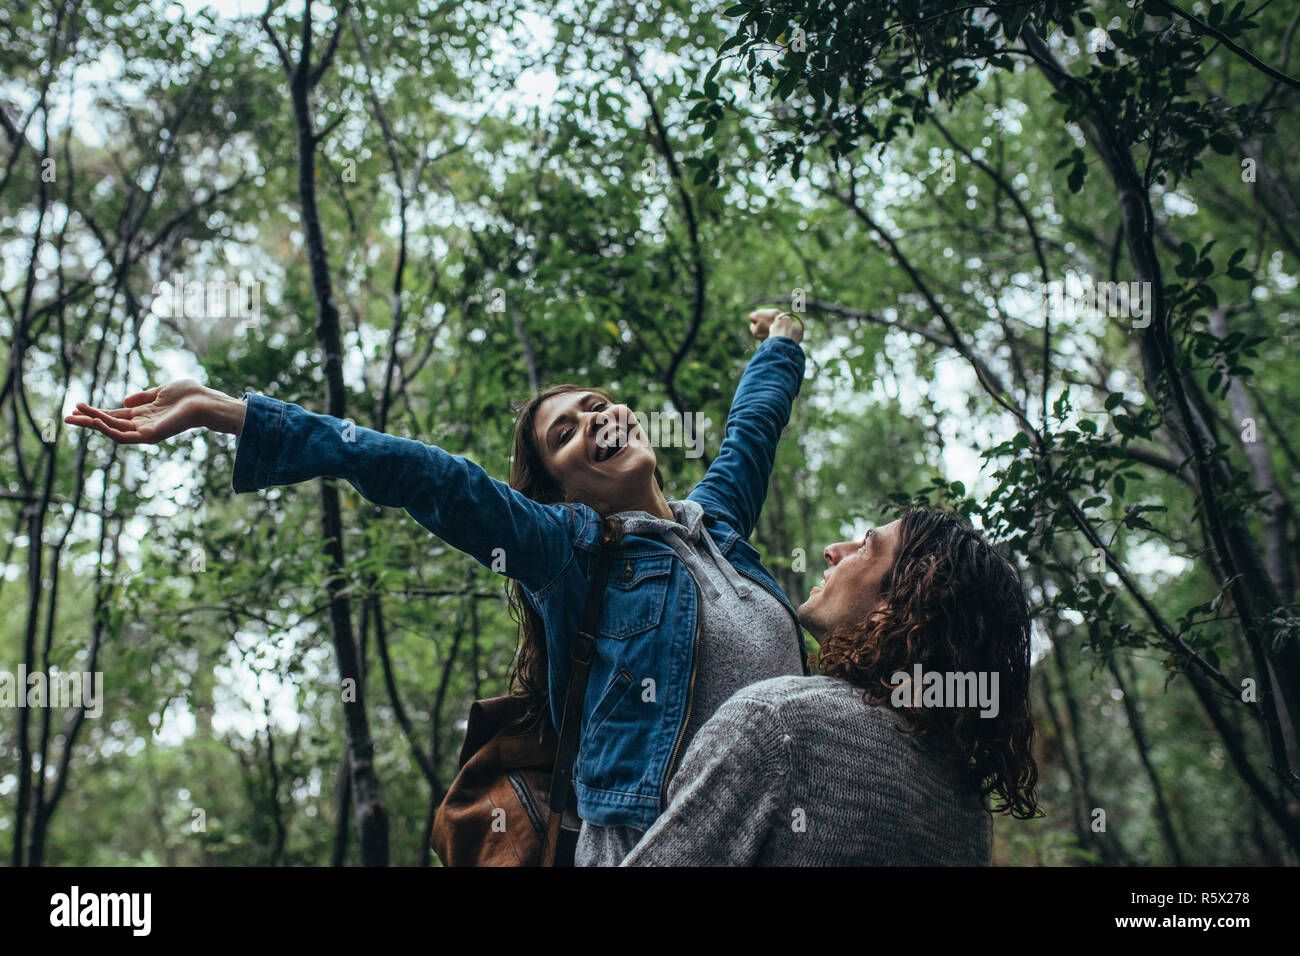 Young woman with her boyfriend in a forest having a great time. Man carrying his girlfriend with arms outstretched and enjoying the rain. Stock Photo